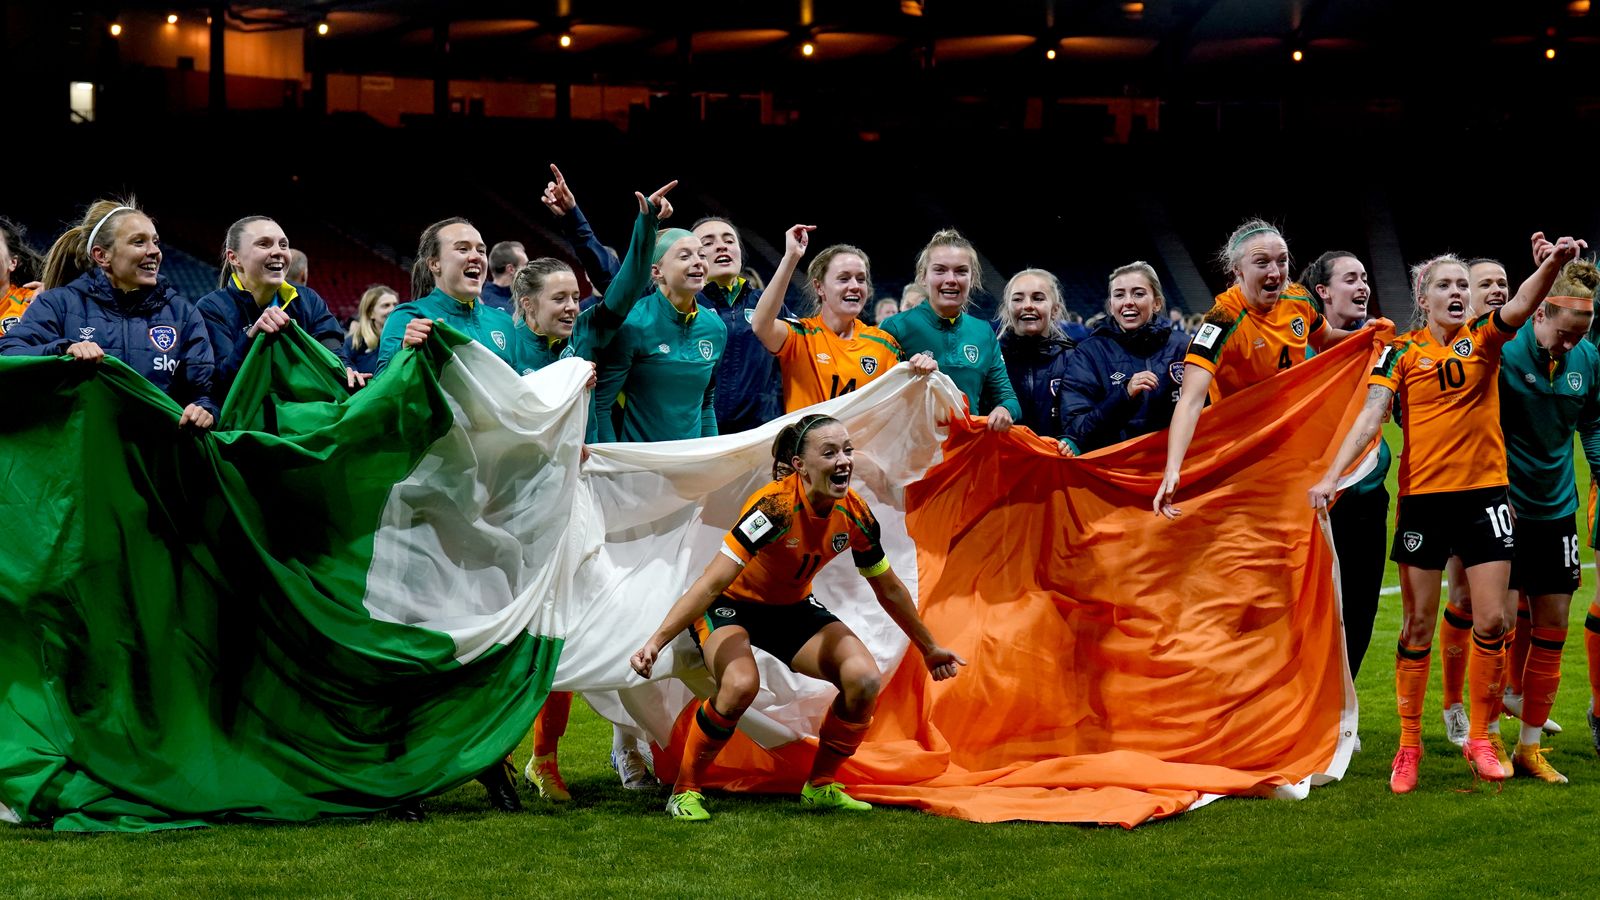 Ireland women players 'sorry for hurt caused' by song referencing IRA